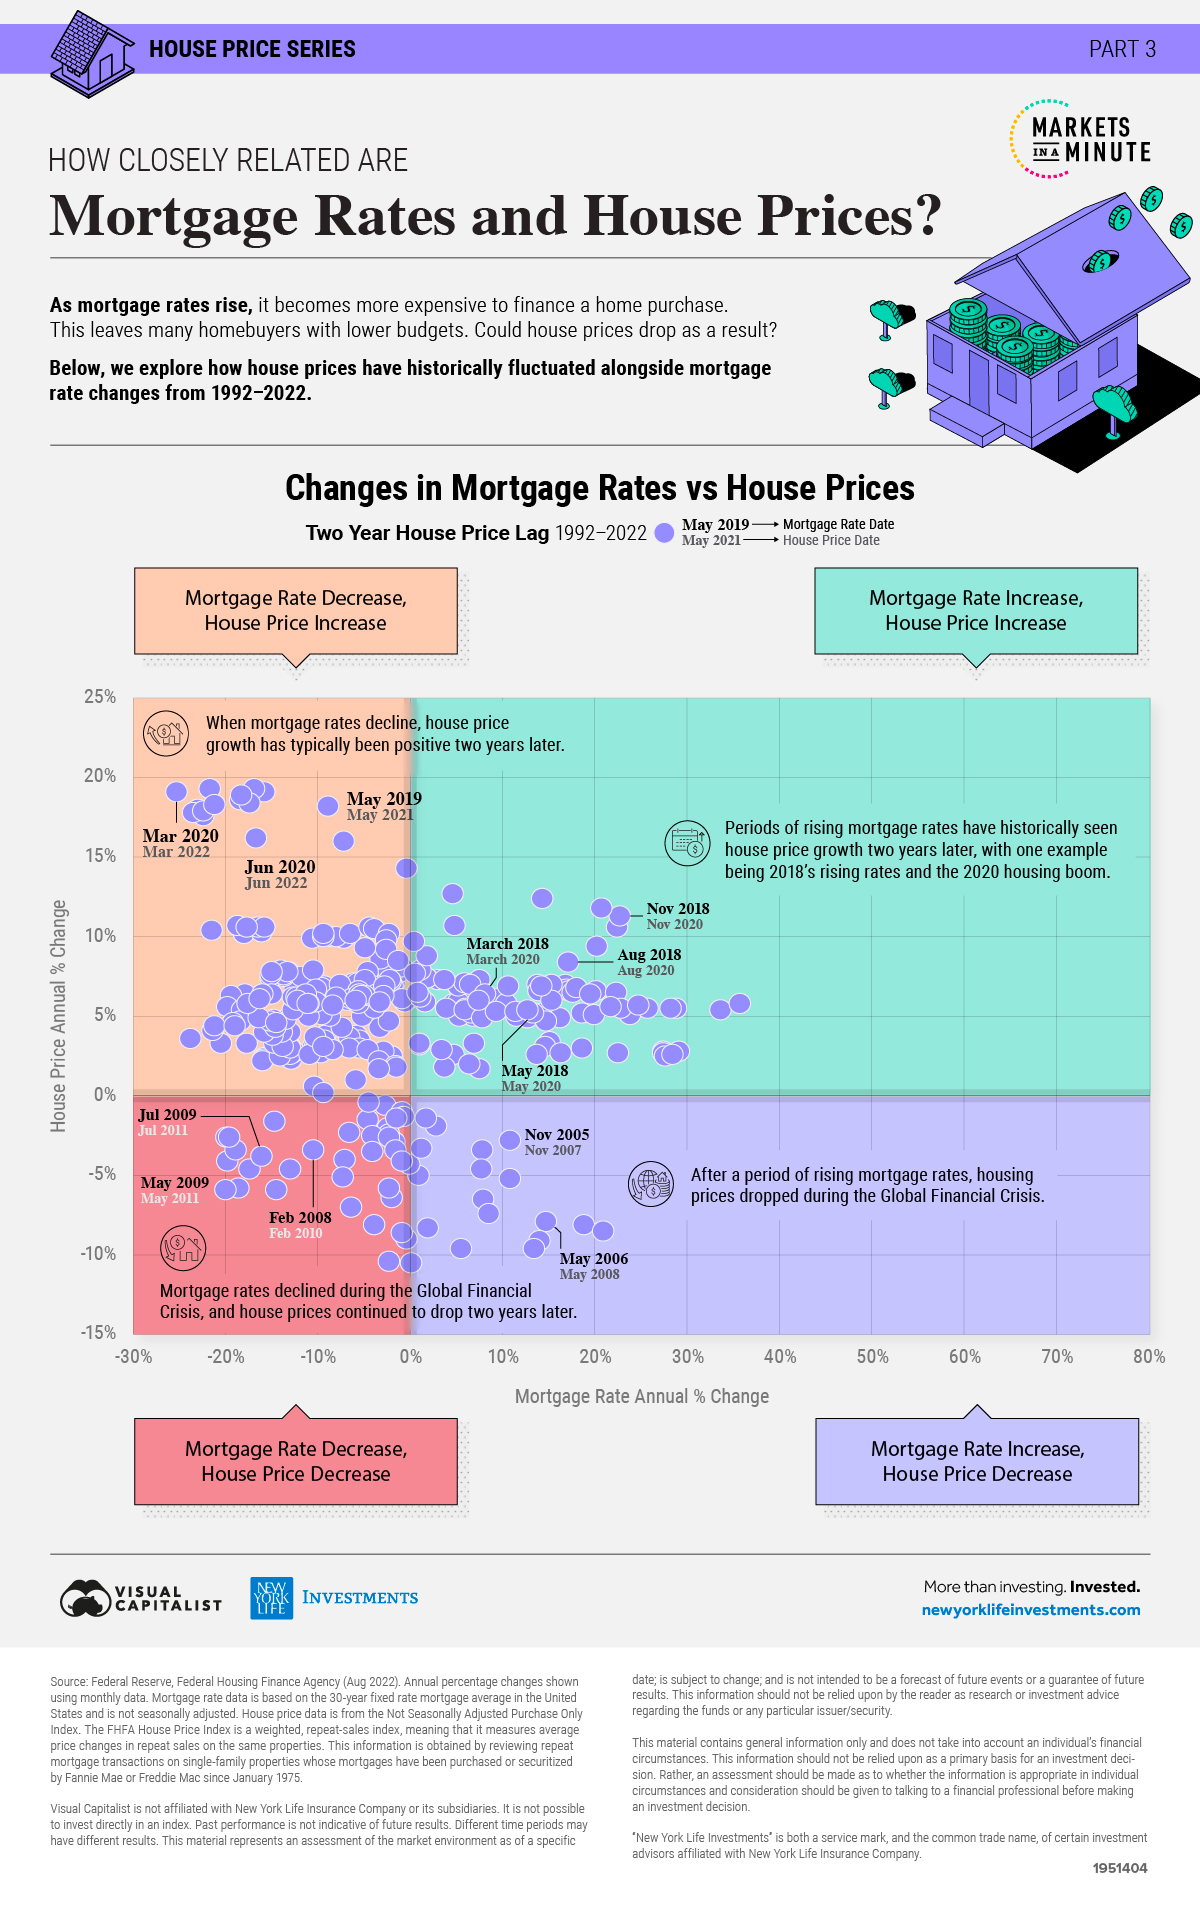 Scatterplot showing the relationship between historical mortgage rates and house prices with a 2 year house price lag.